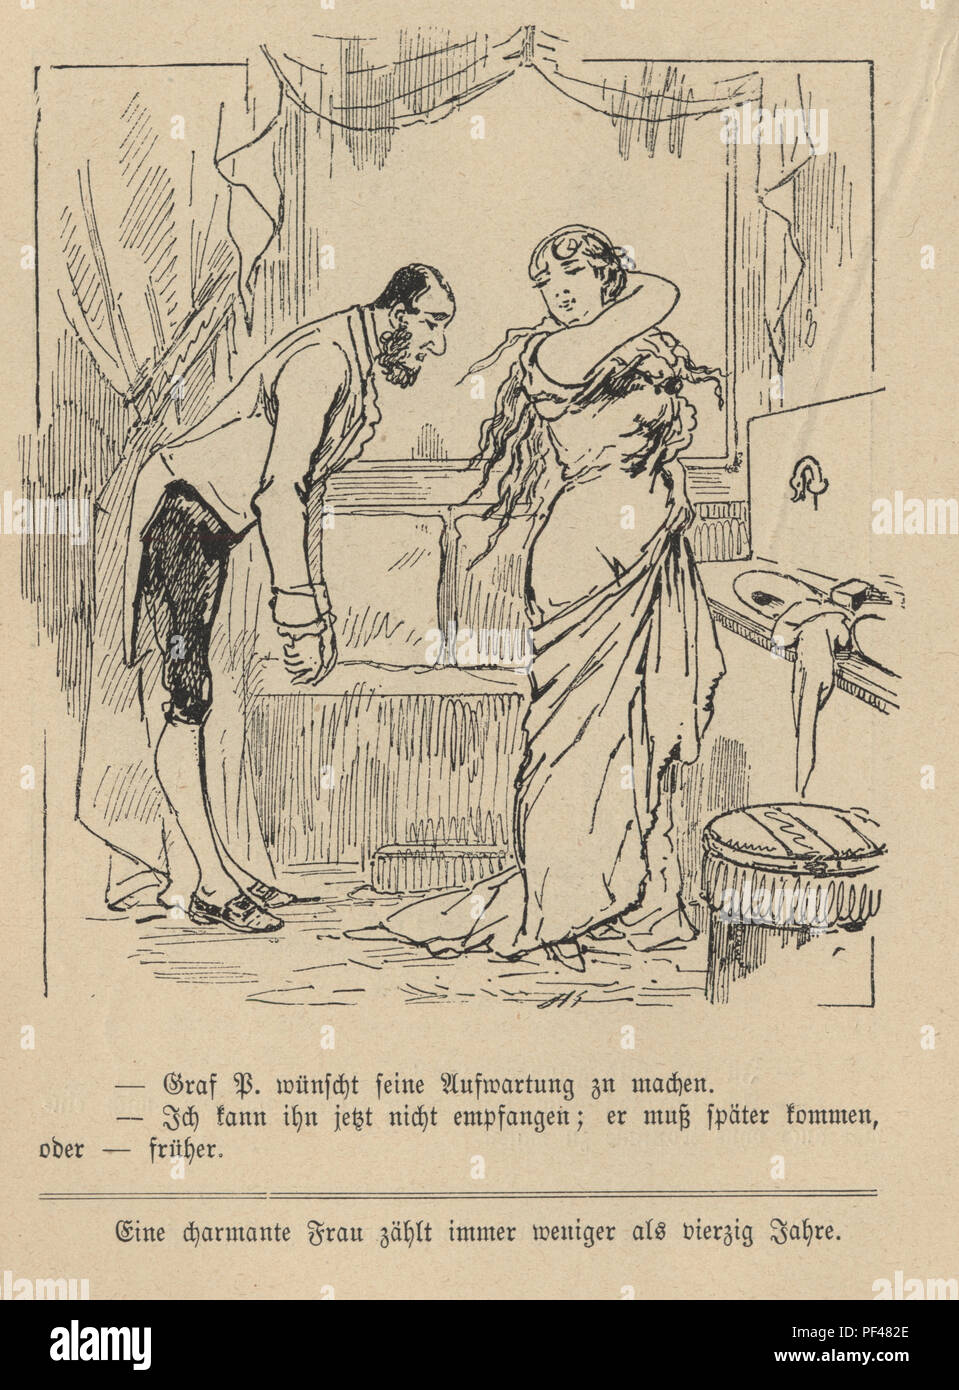 Vintage engraving of a Cartoon of a butler helping a woman wash her back, 1880s, German Stock Photo